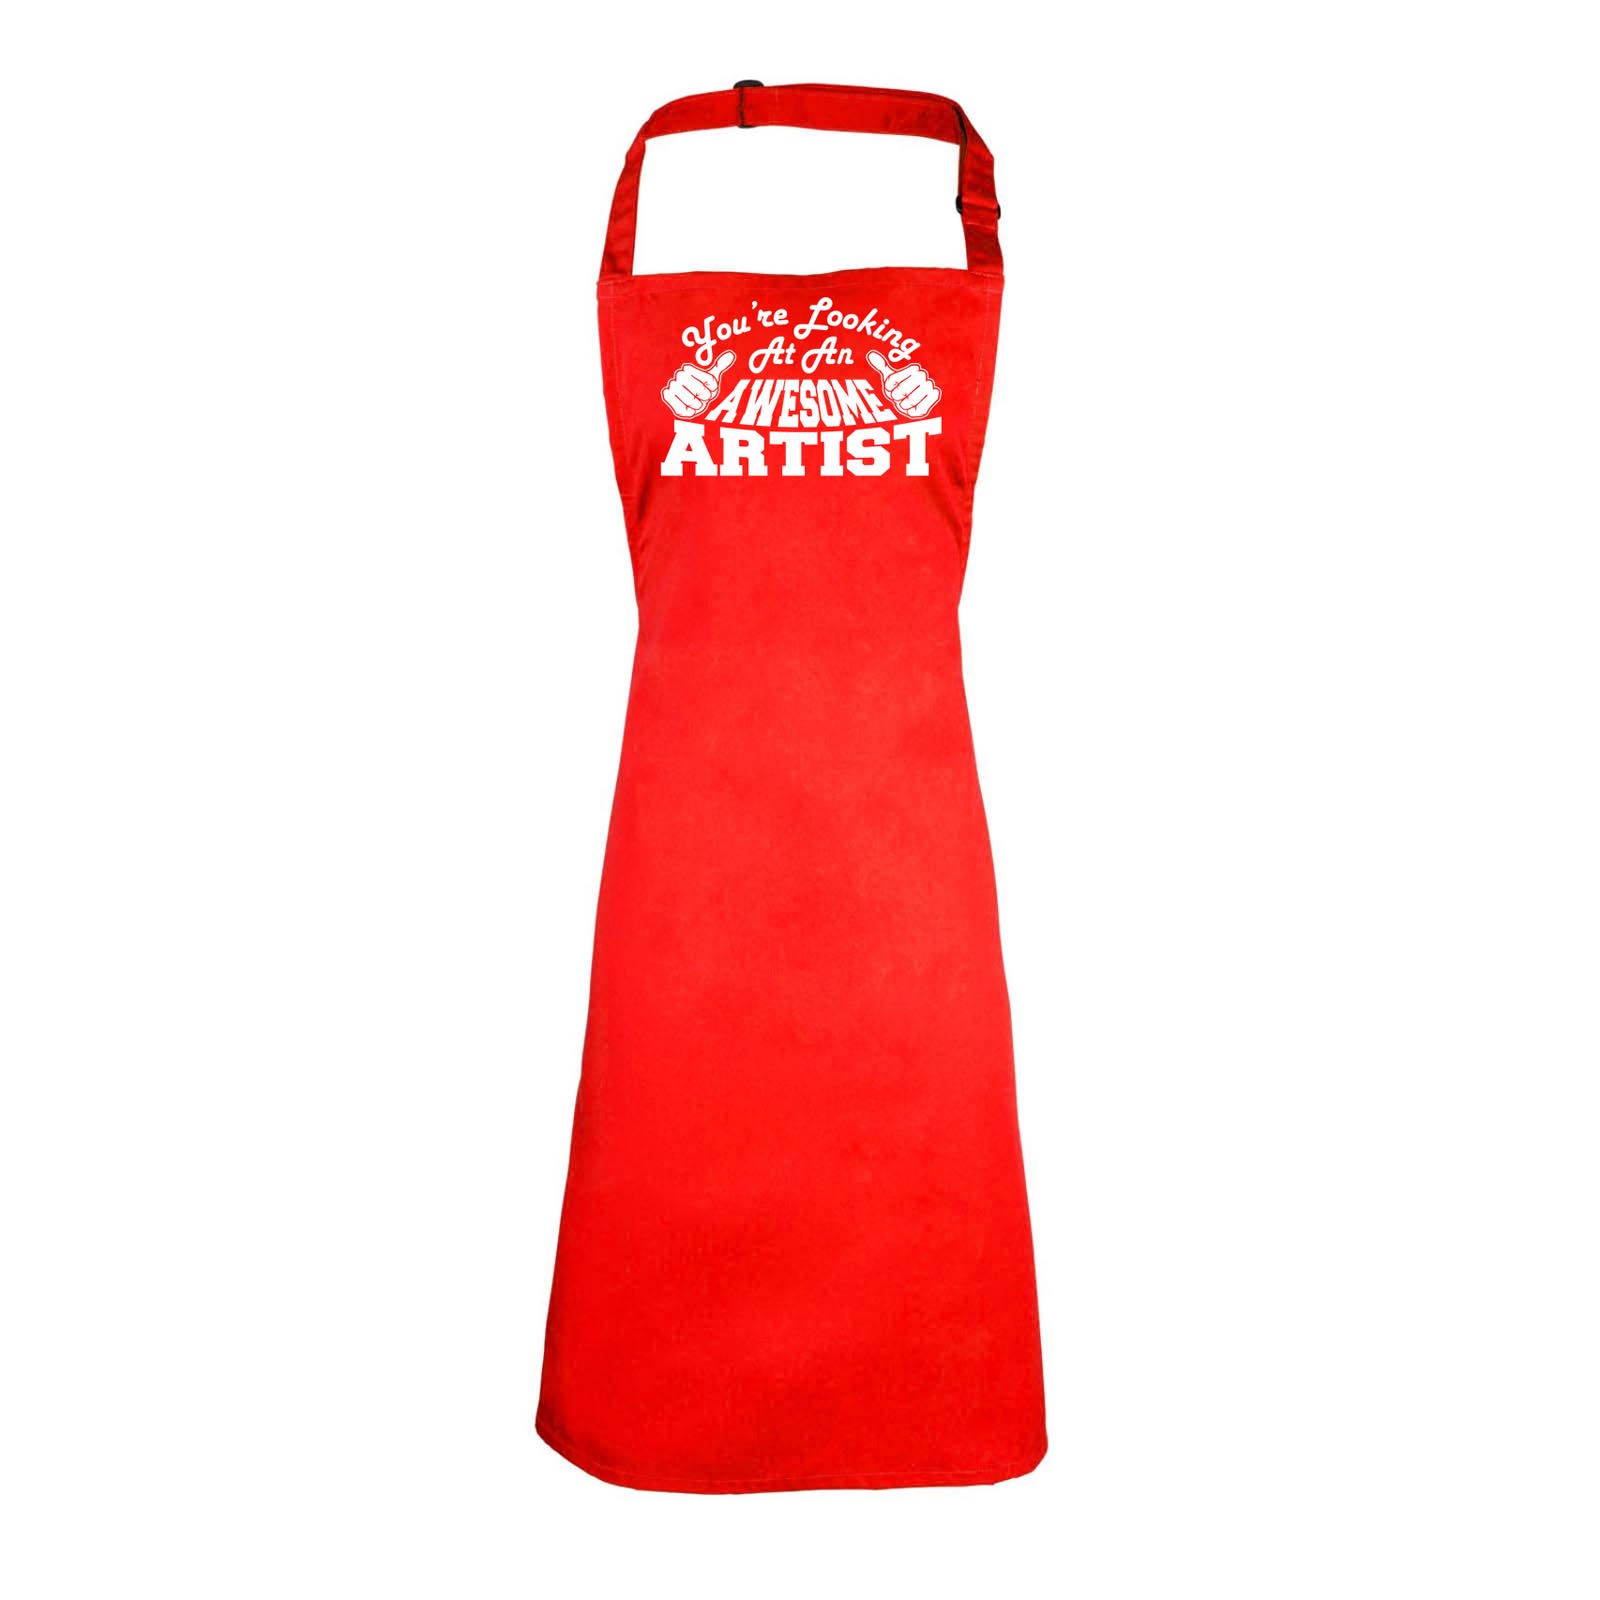 Funny Novelty Apron Kitchen Cooking Jeweler Youre Looking At An Awesome 